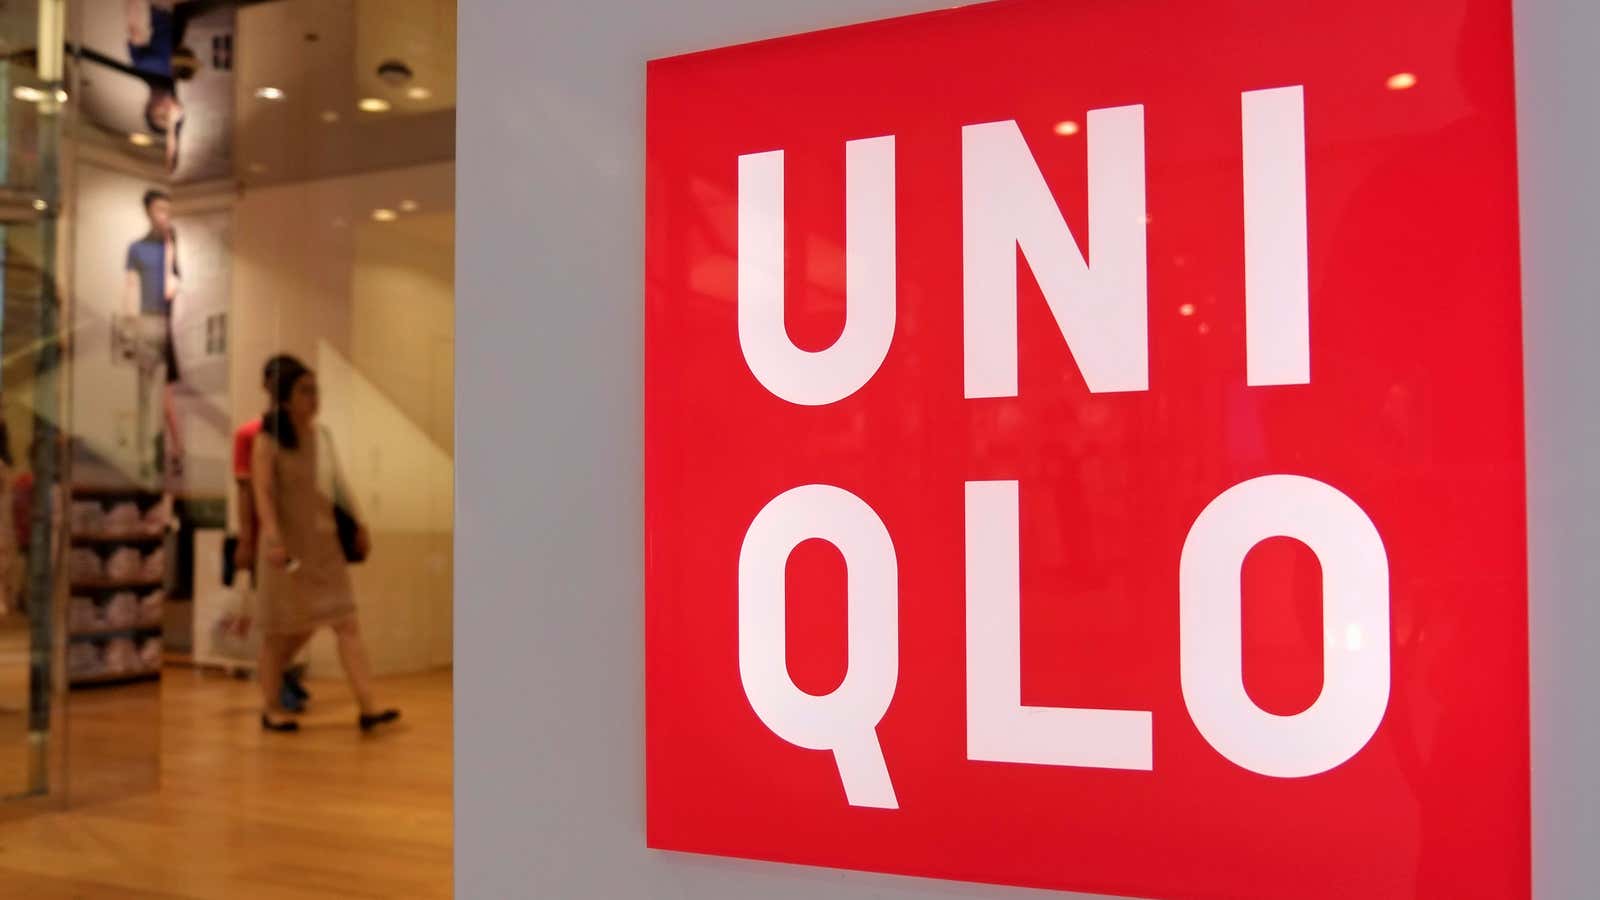 Uniqlo abruptly reversed its decision on Russia.